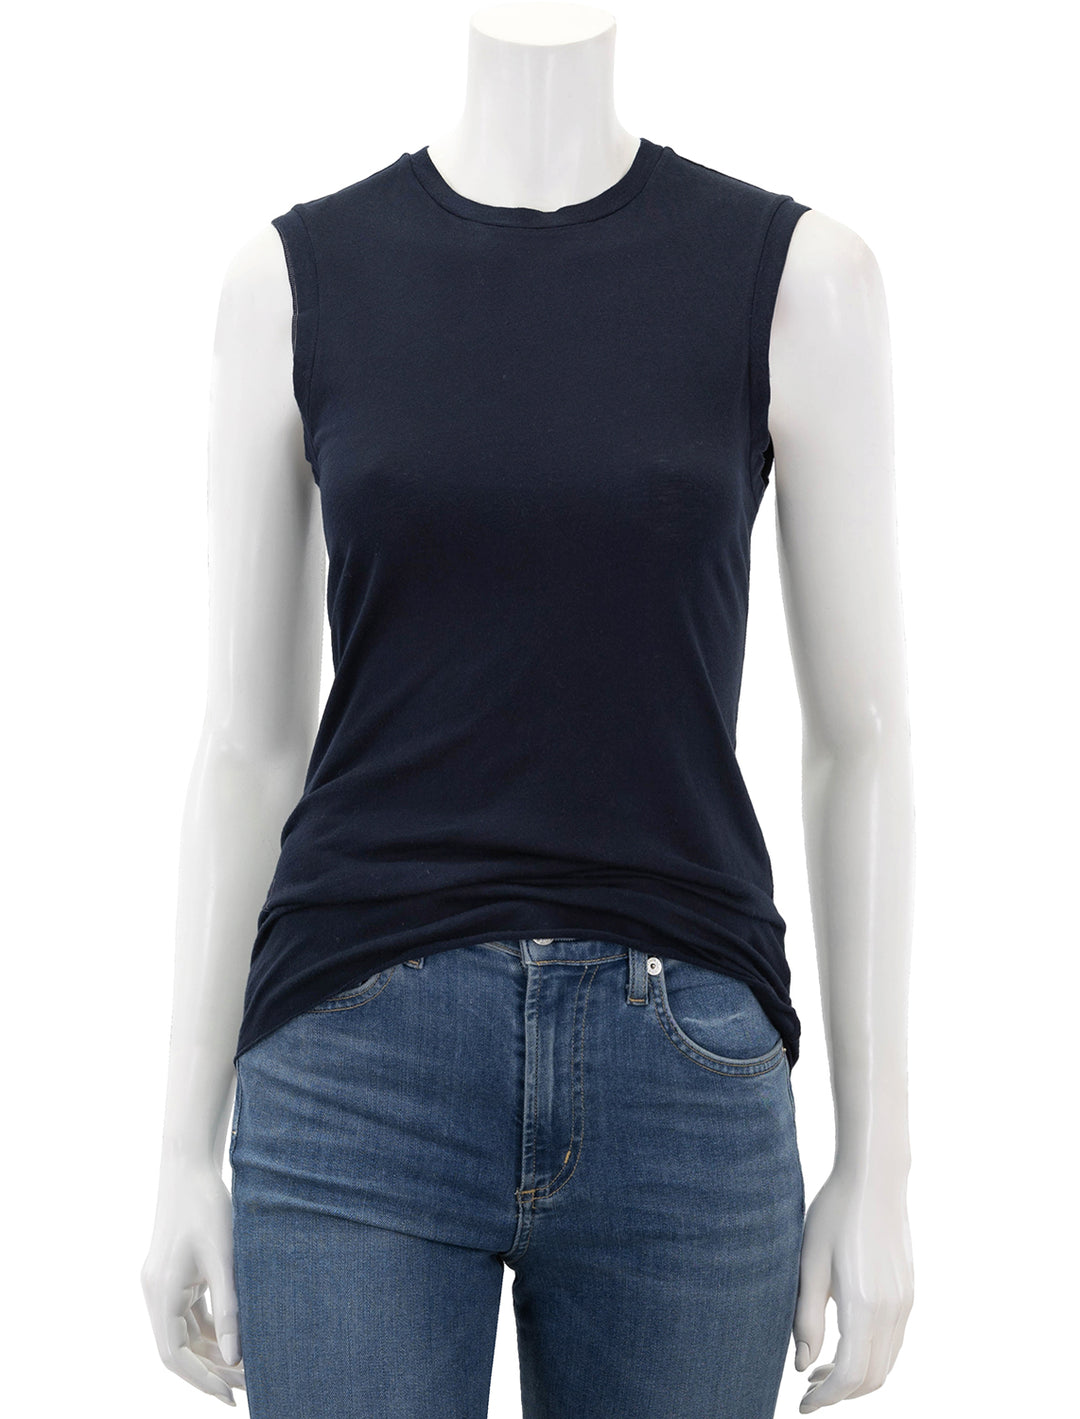 Front view of Nili Lotan's muscle tee in navy.